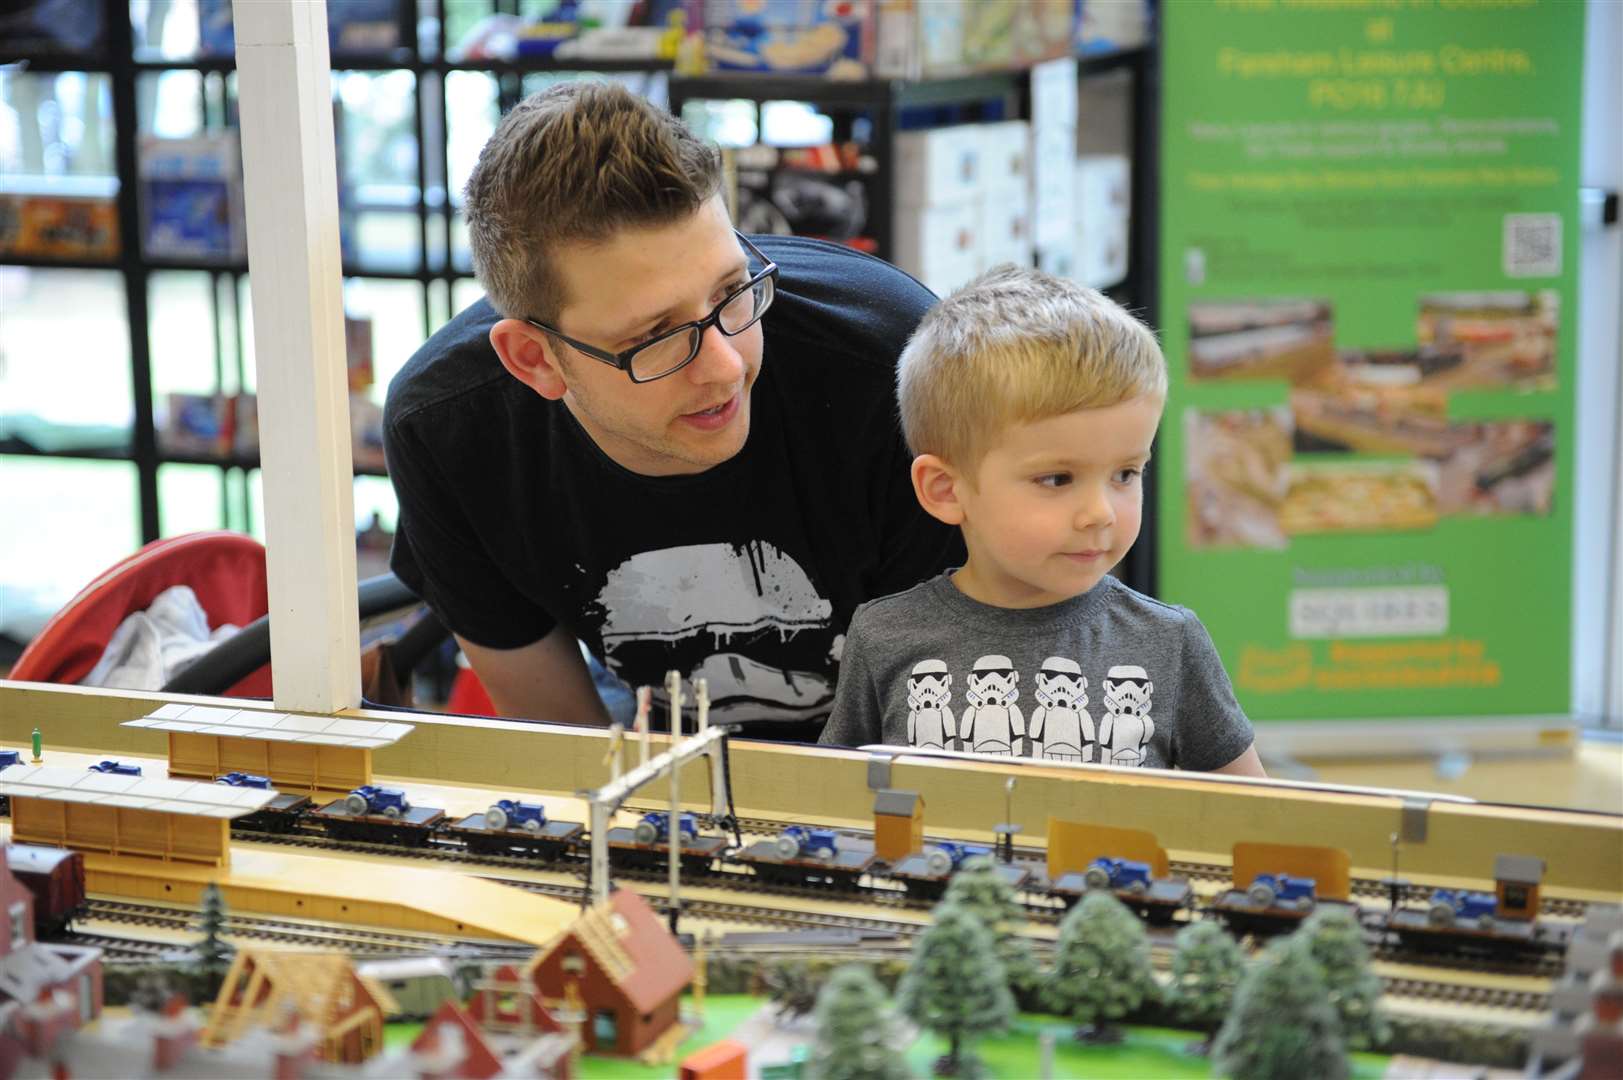 Take the kids to see the model exhibition in Rochester